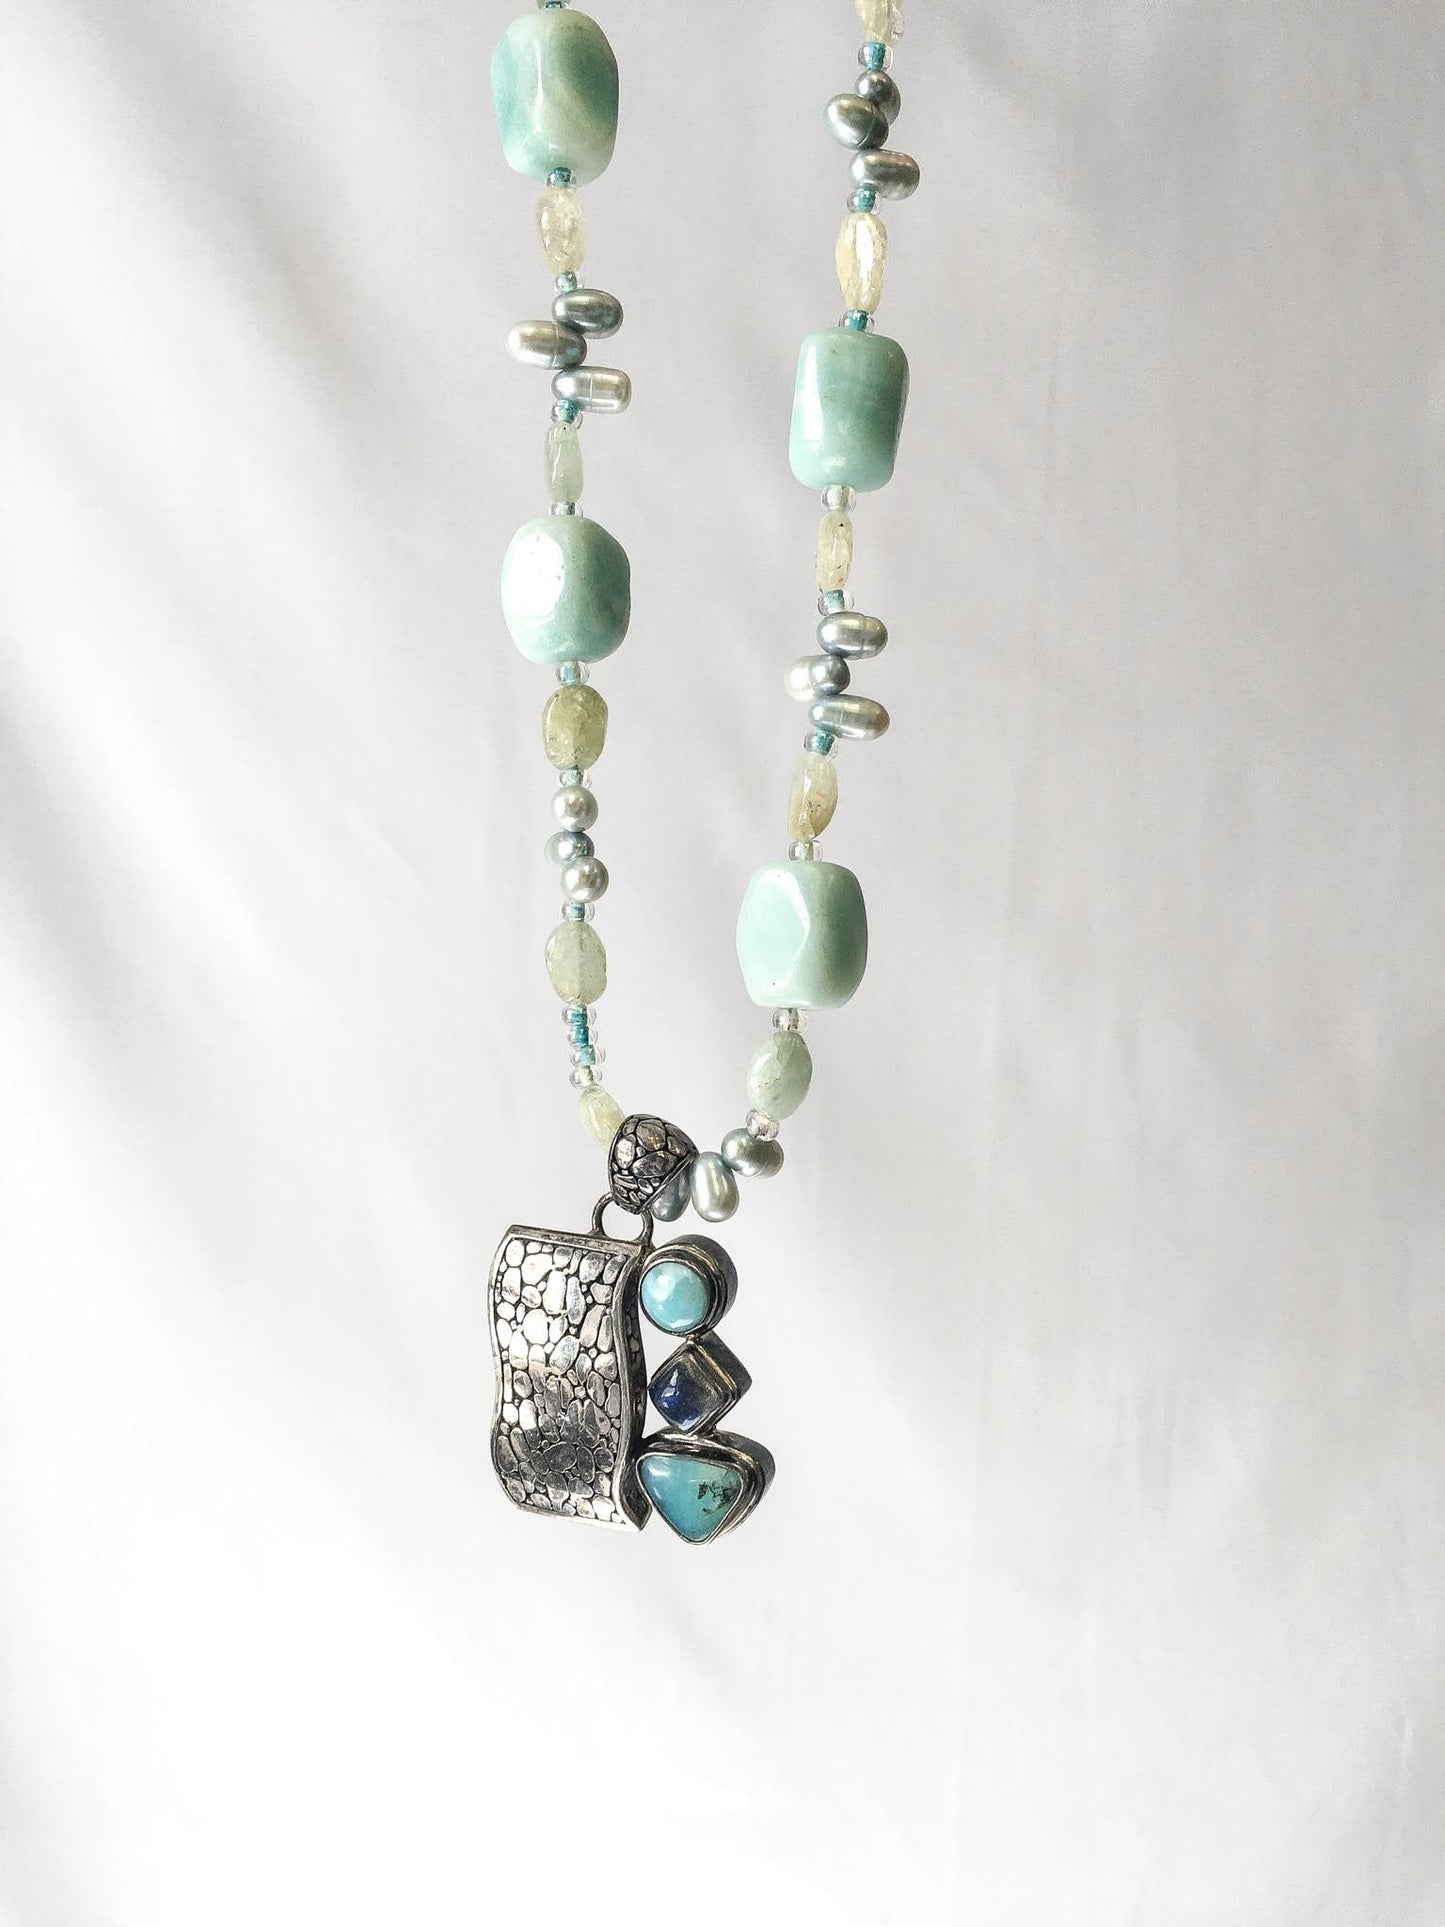 925 Aquamarine Quartz Blue Pearl Necklace with 925 Pendant with Blue Stones, Vintage Chunky Statement Necklace